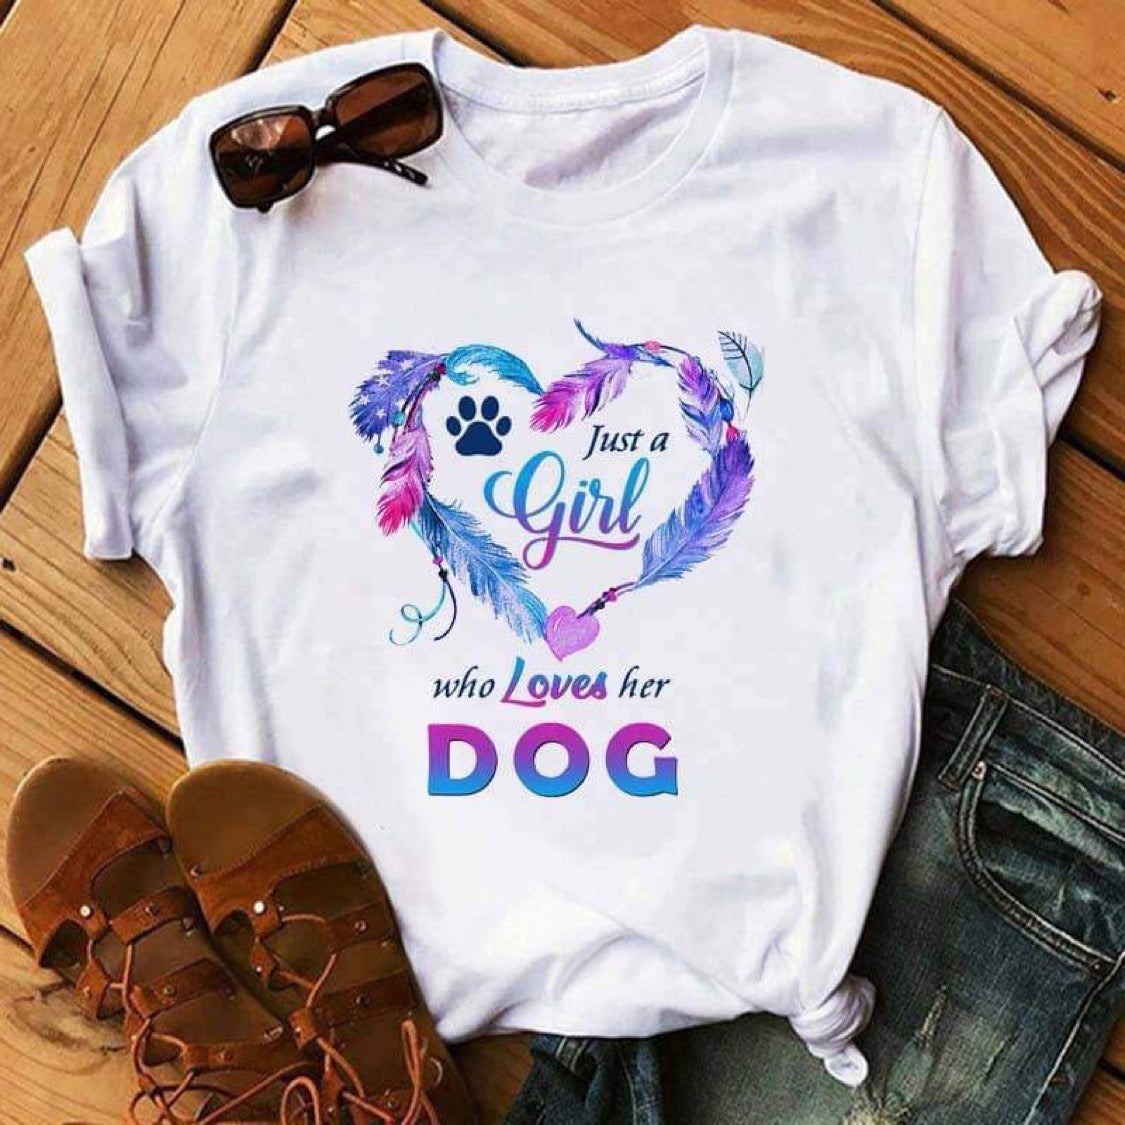 "Just A Girl Who Loves Her Dog" T-Shirt